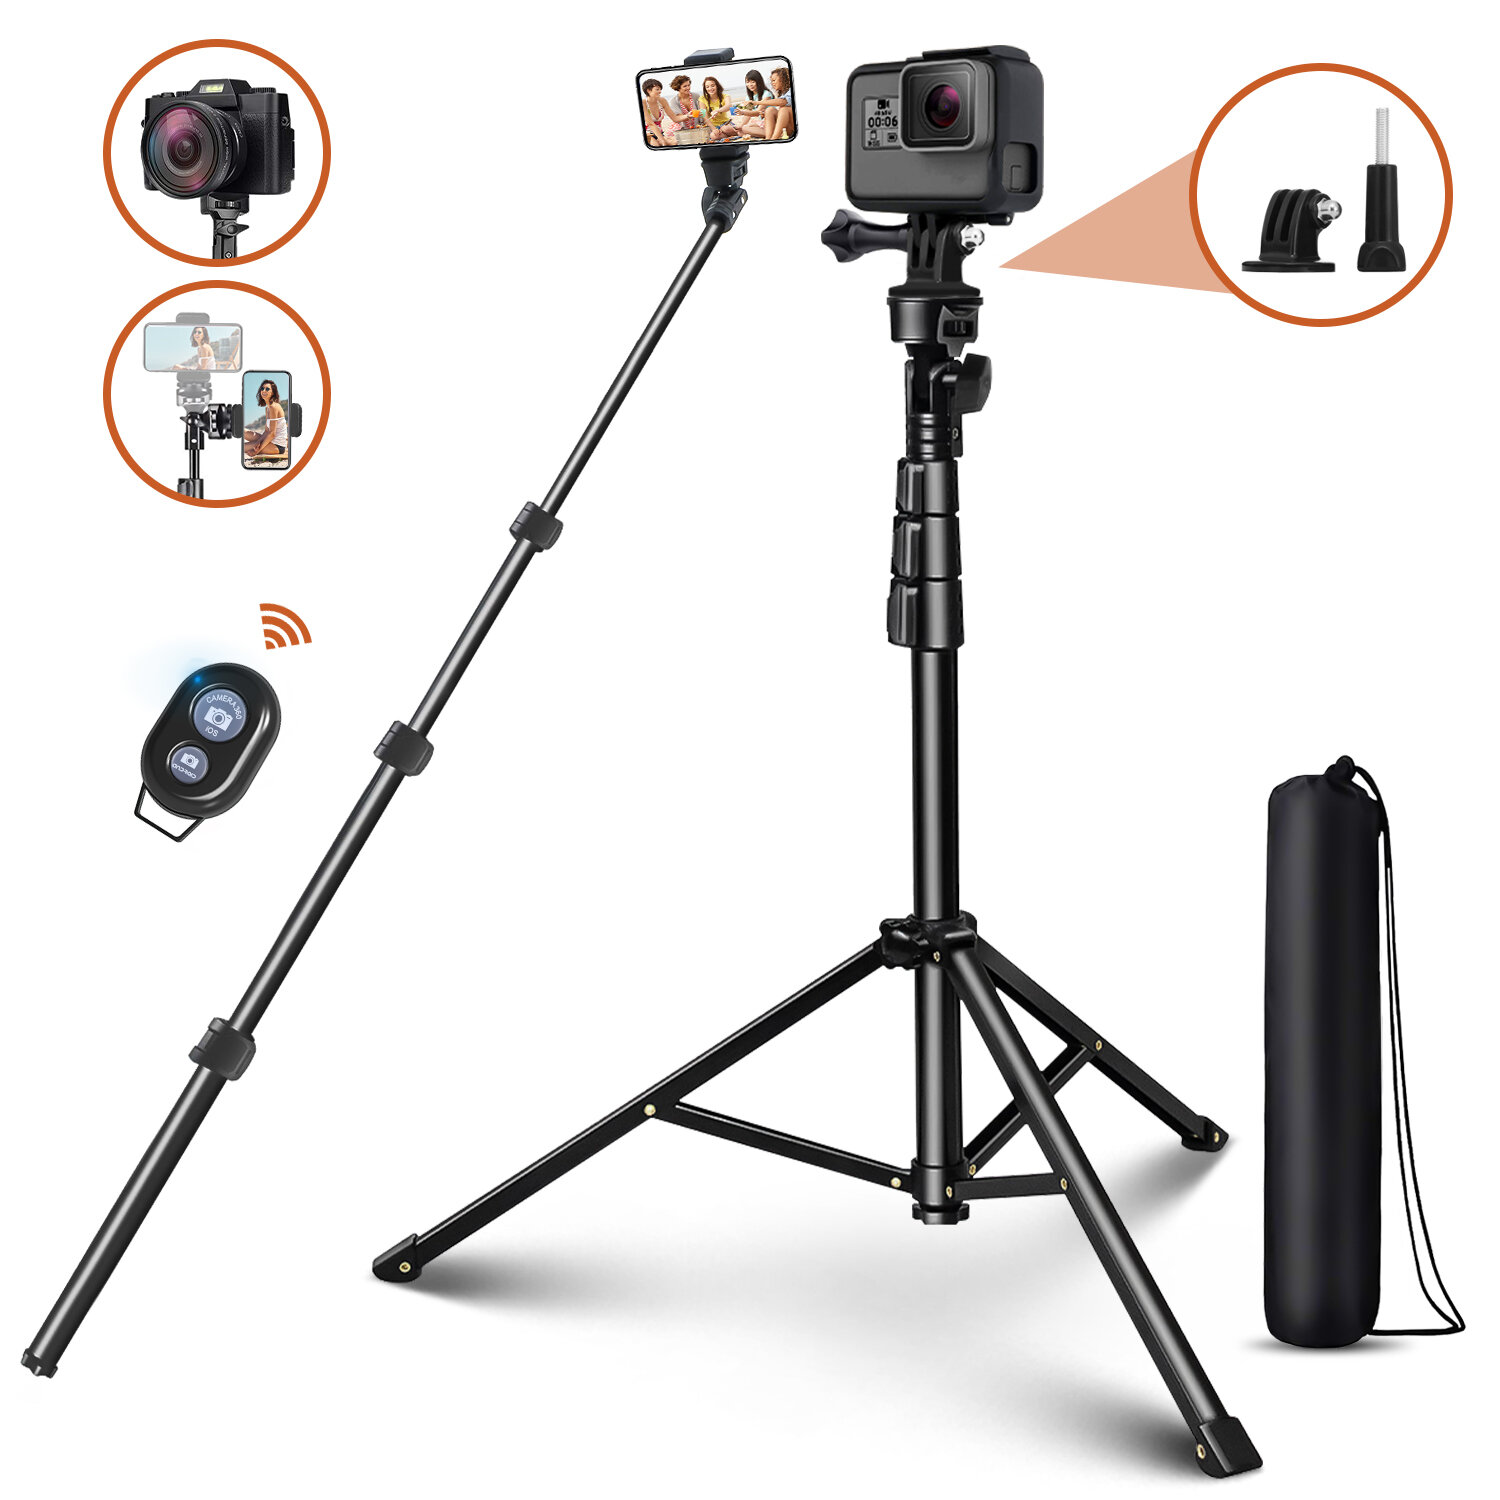 Multifunctional Selfie Stick 1.3m Telescopic Height Adjustable Tripod Stand Phone Holder with Remote Shutter for Camera Phone